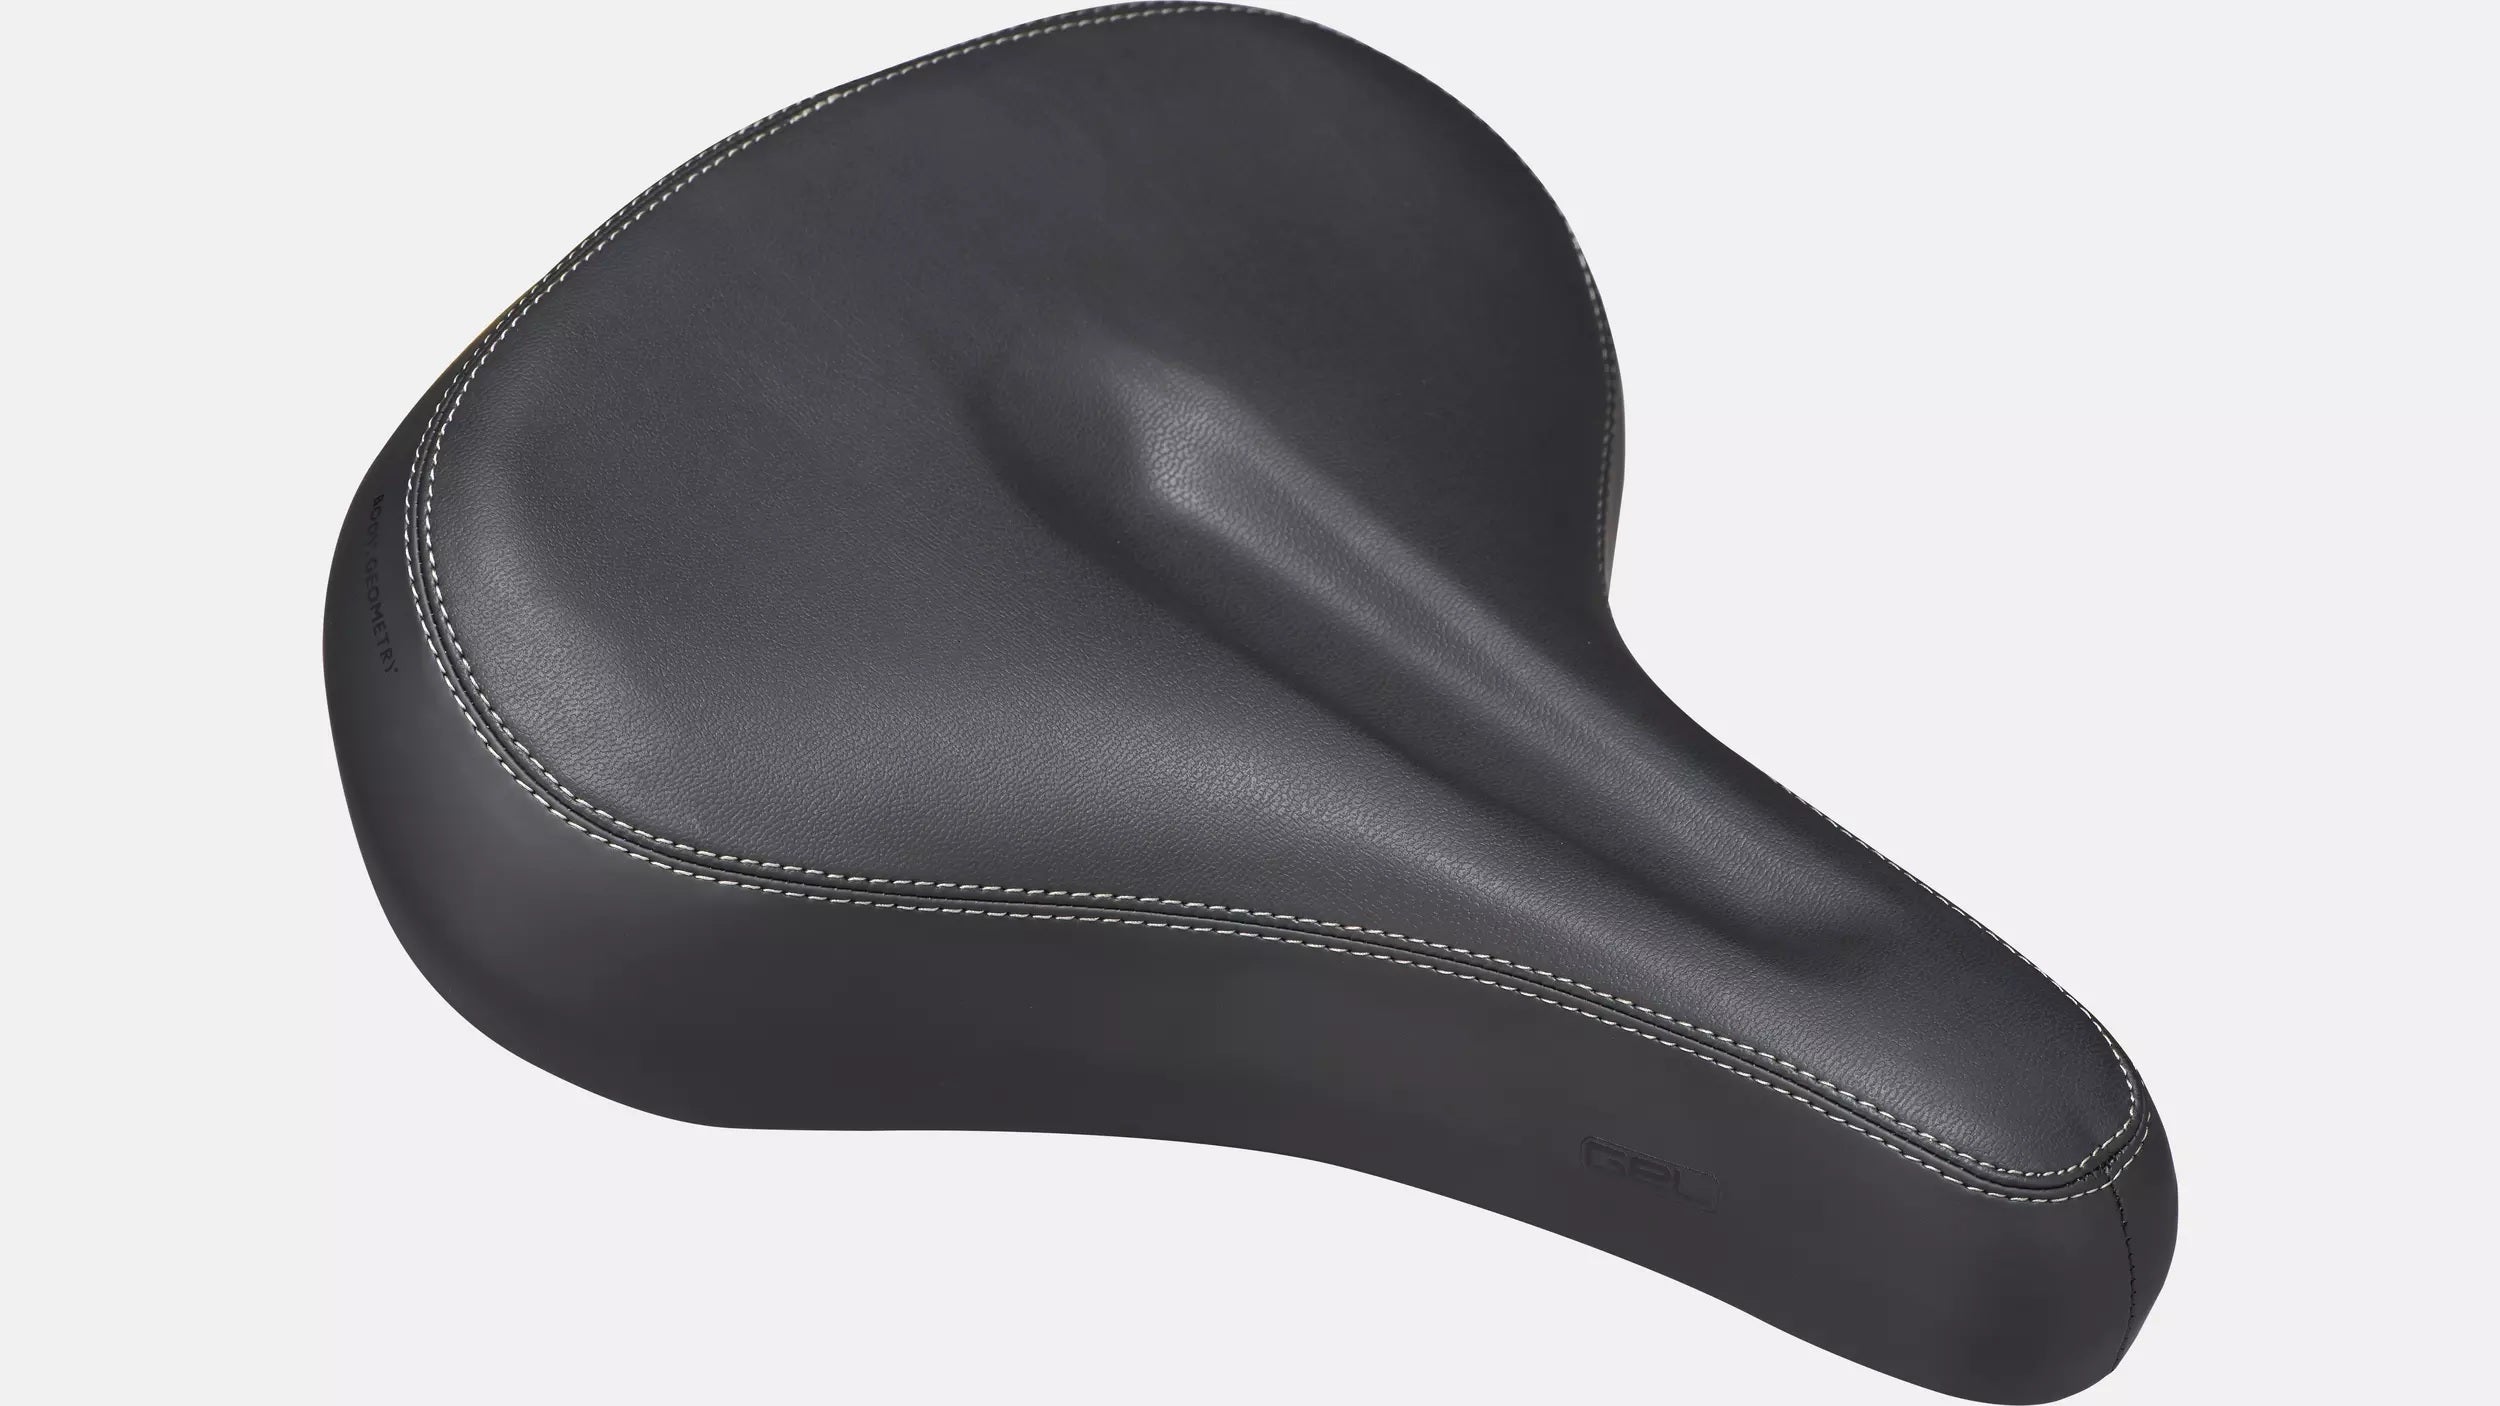 Specialized the Cup Gel Bike Saddle